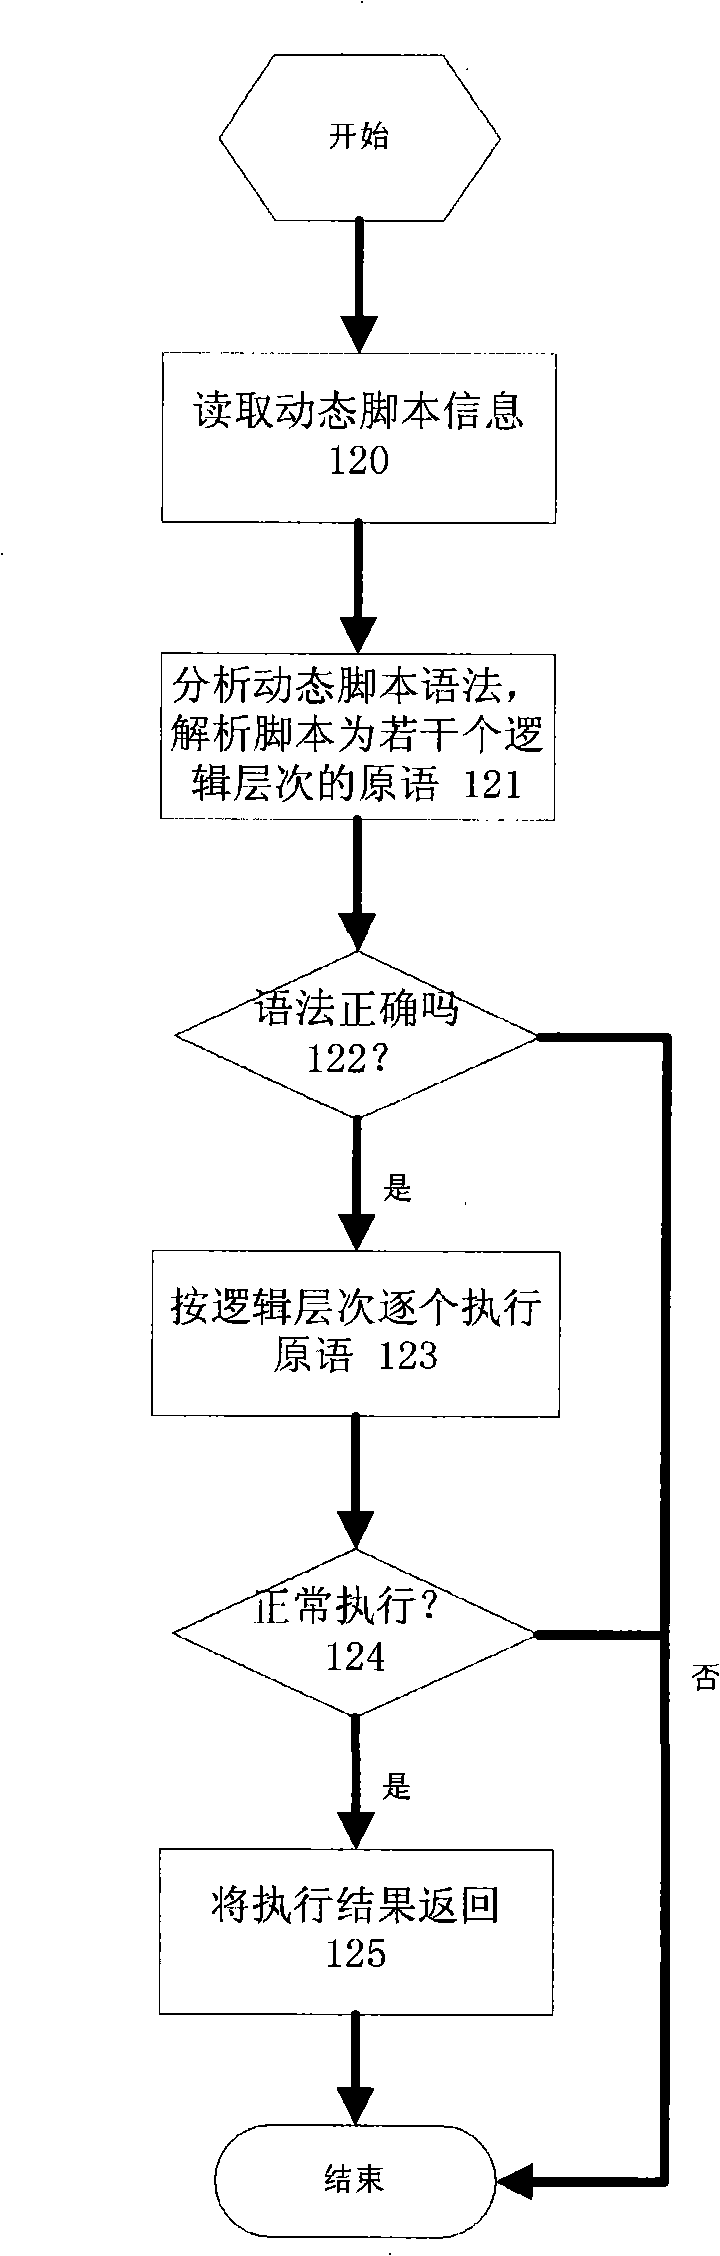 Man-machine command interaction method for network management terminal based on graphical interface